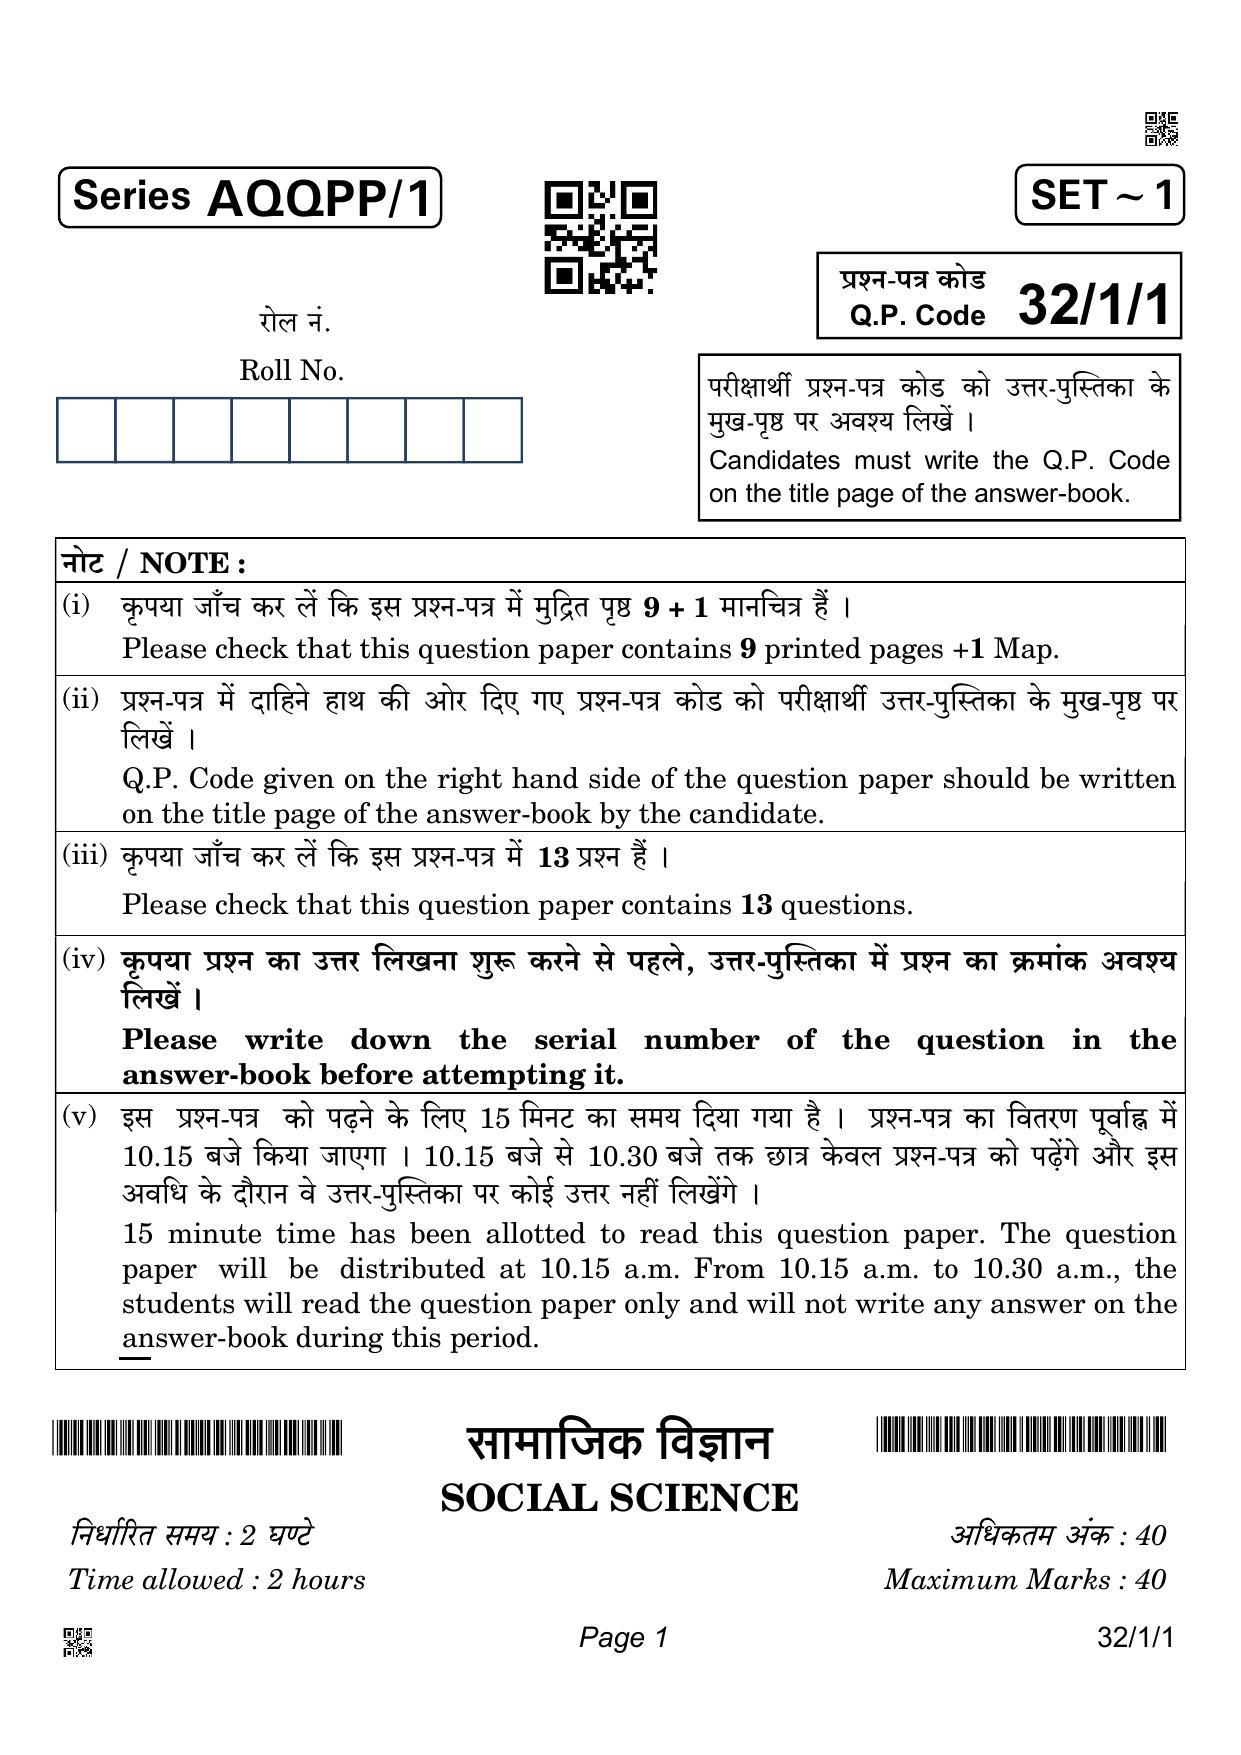 CBSE Class 10 32-1-1 Social Science 2022 Question Paper - Page 1